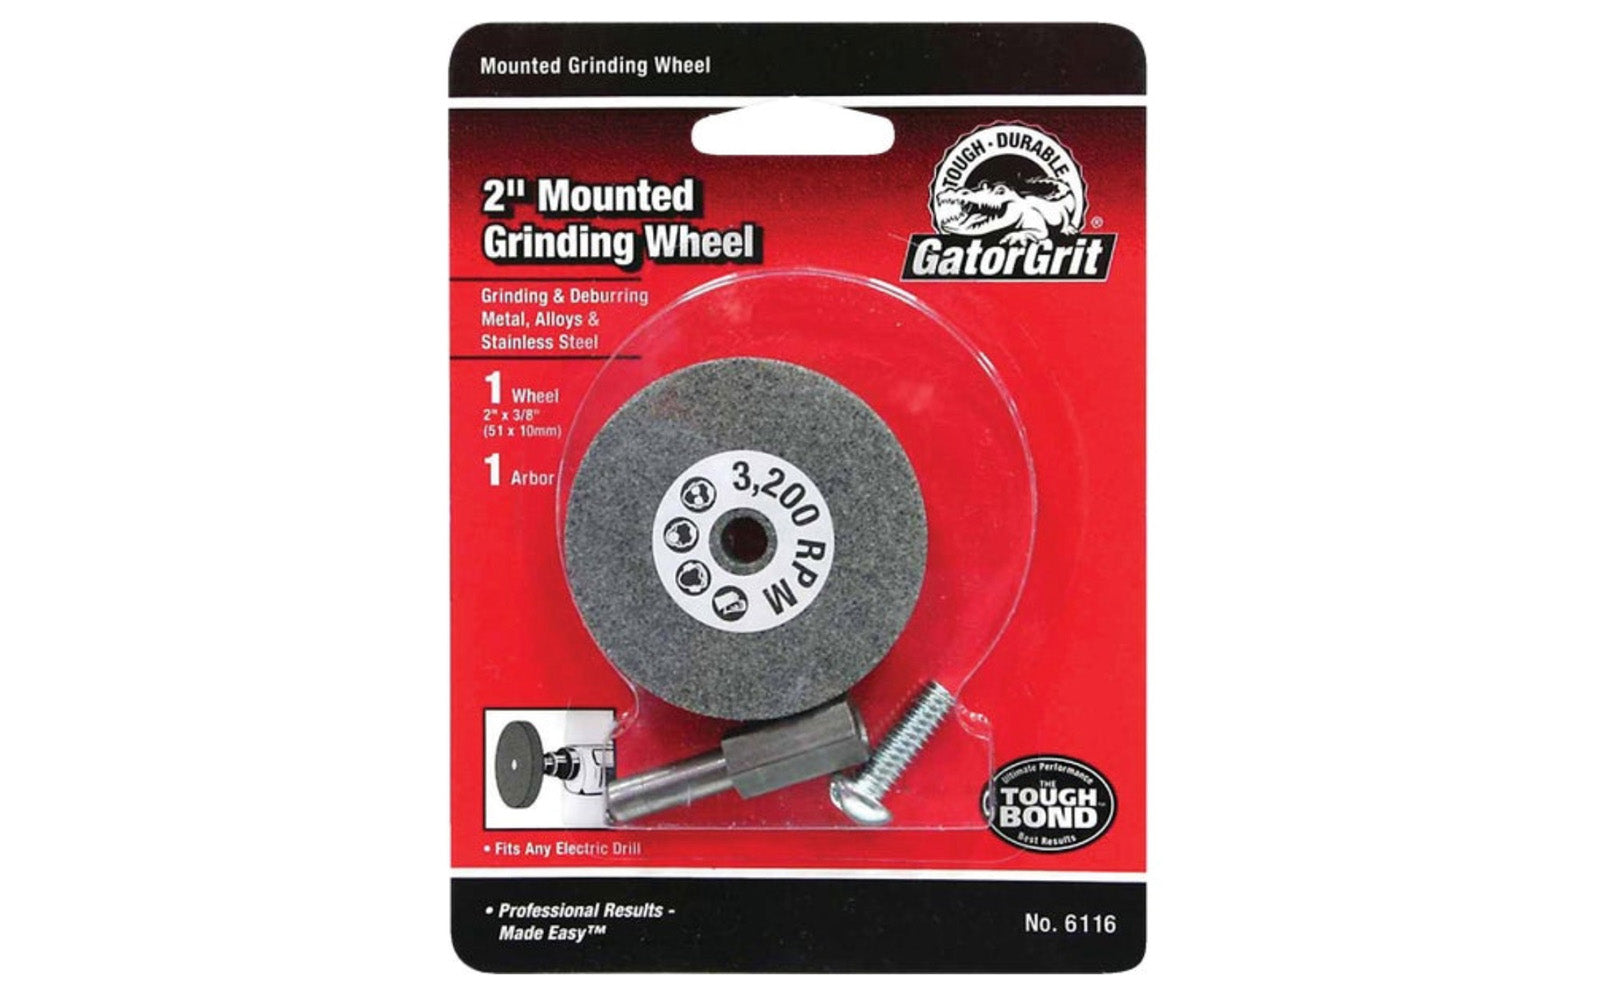 Aluminum oxide mounted grinding wheel with 1/4